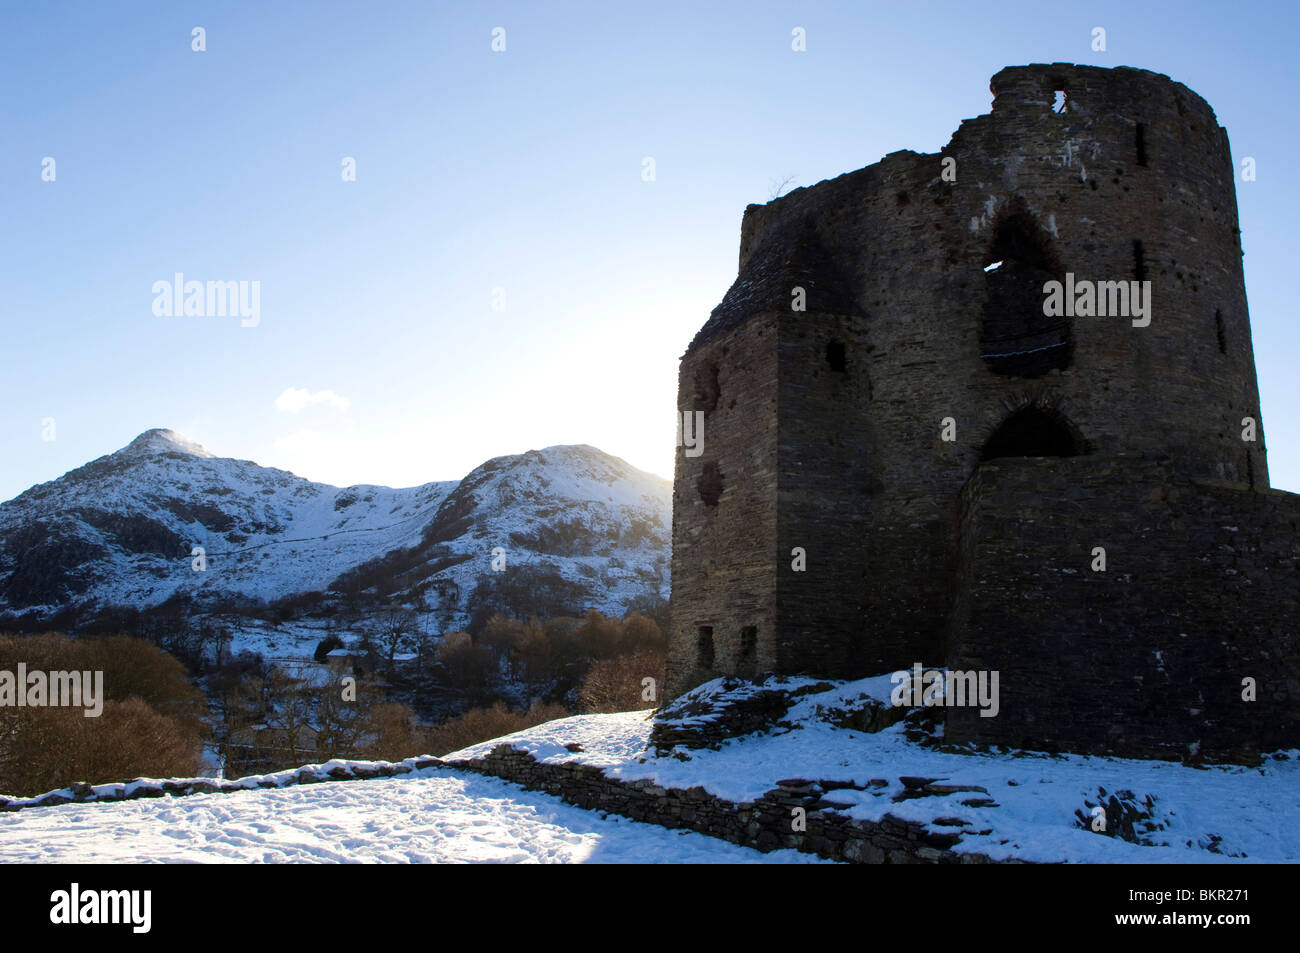 Wales, Gwynedd, Snowdonia. Dolbadarn Castle one of the great castles built by the Welsh princes in the C13th Stock Photo